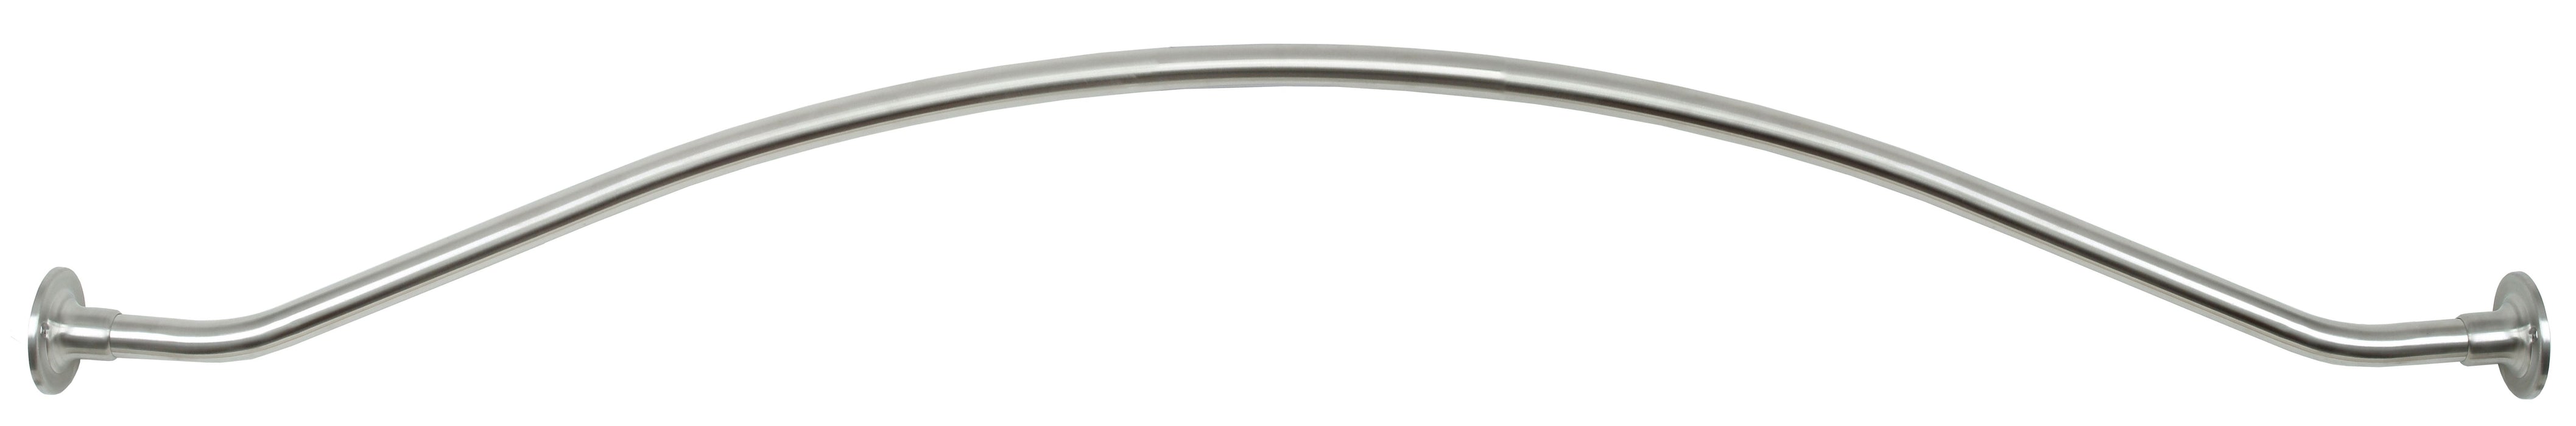 Pamex BSRCP573 5' Spacious Shower Rod with Flange Bright Chrome Finish